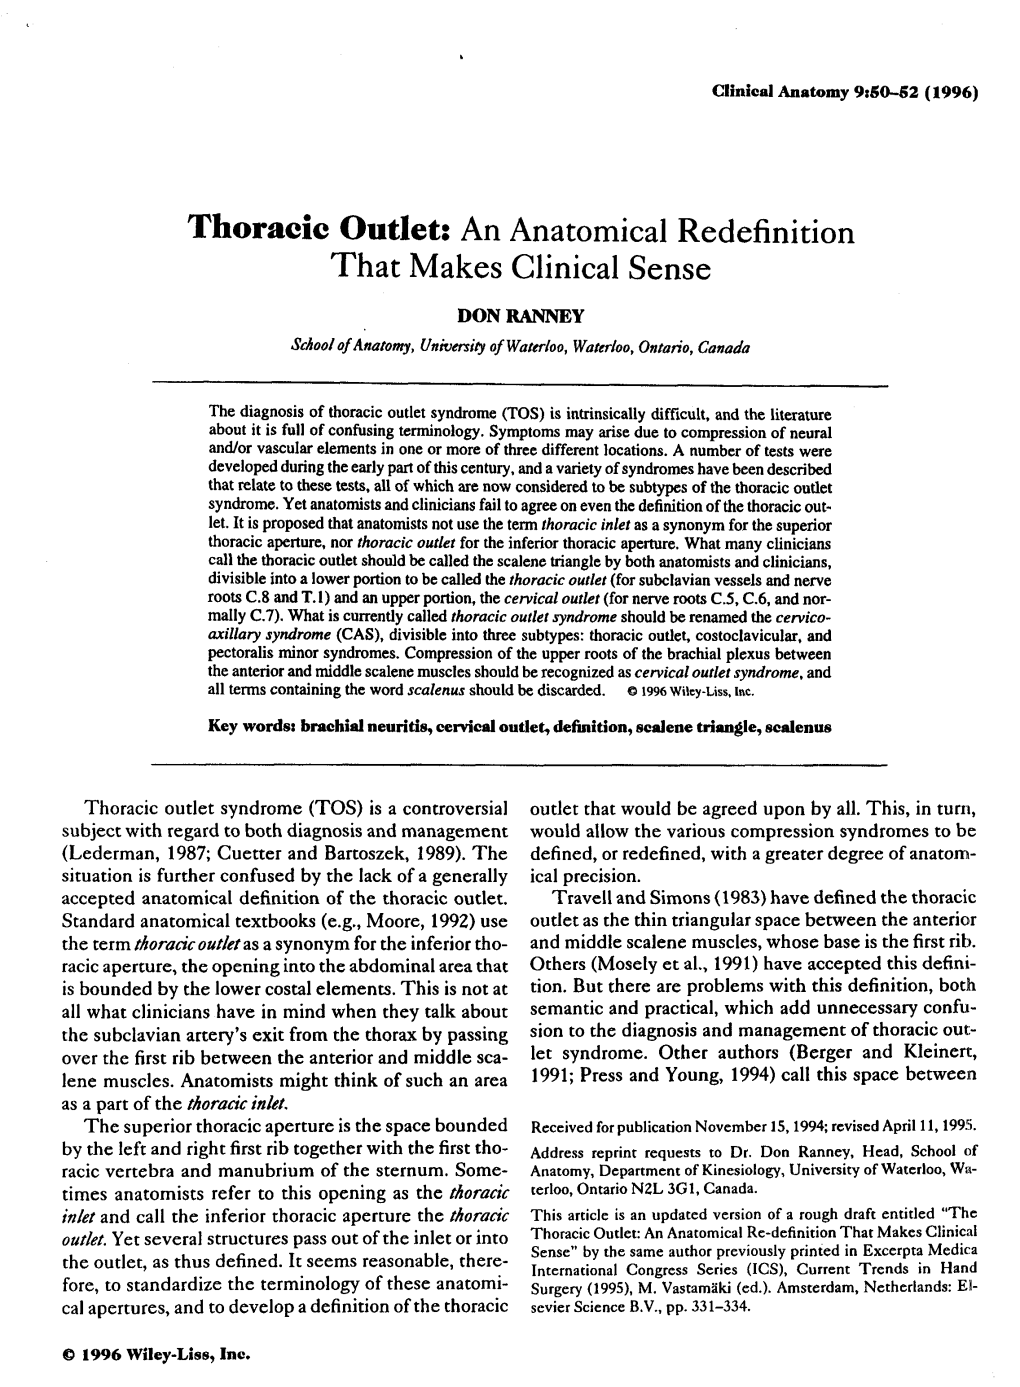 Thoracic Outlet: an Anatomical Redefinition That Makes Clinical Sense